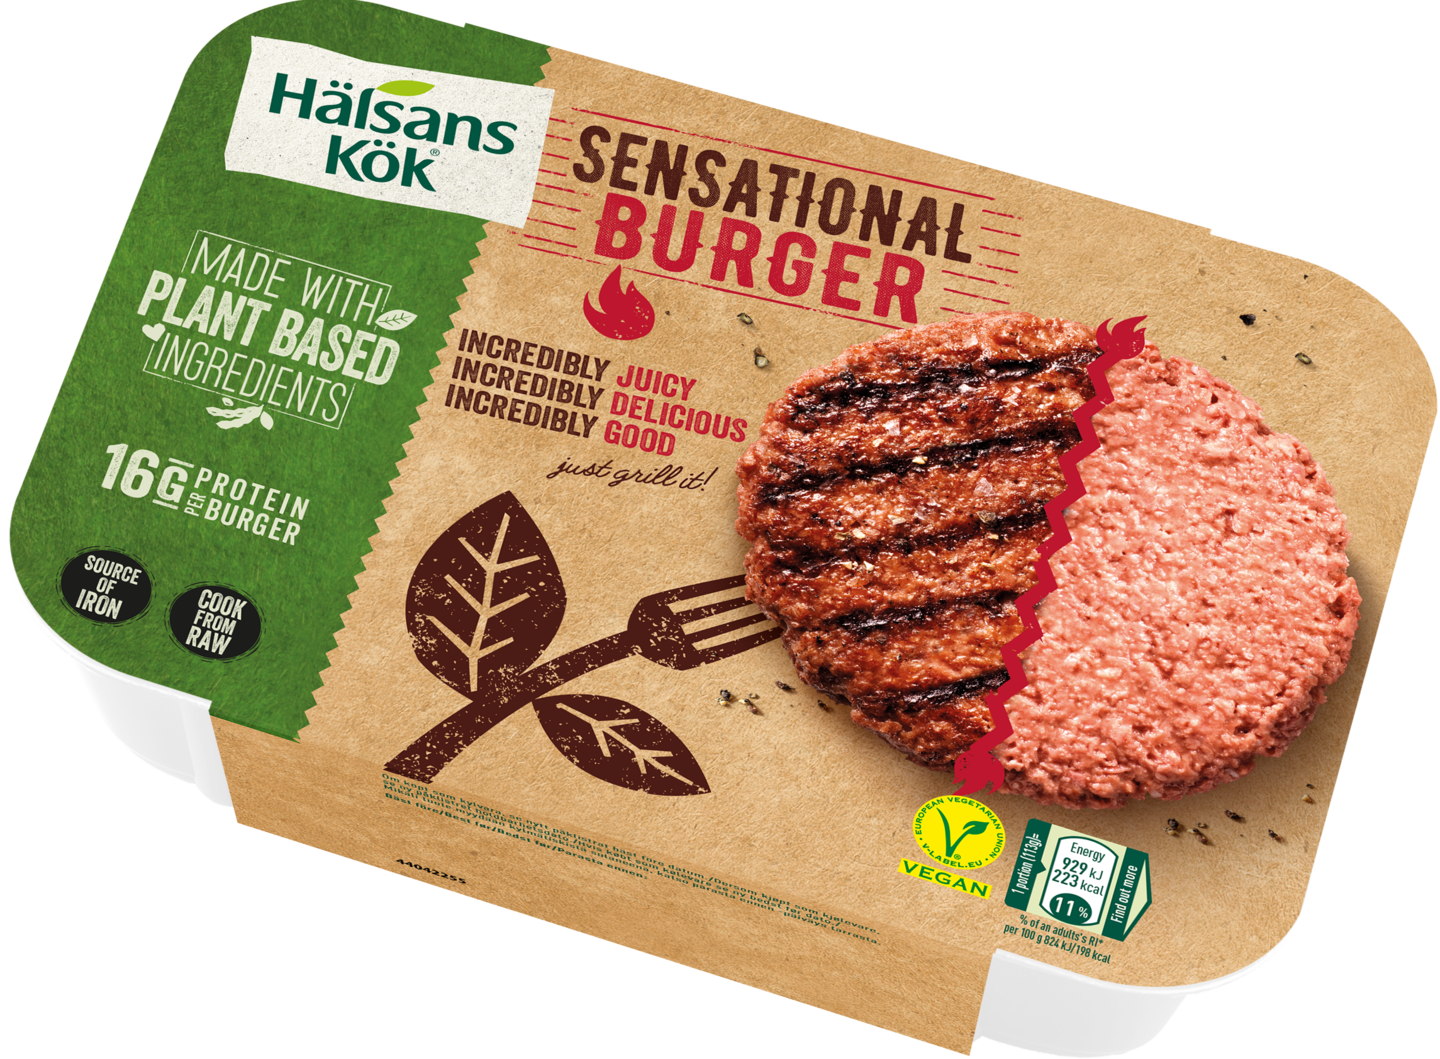 Strong recommendation for Incredible Burger by Hälsans Kök, available in at  least Northern Europe : r/VeganForCircleJerkers